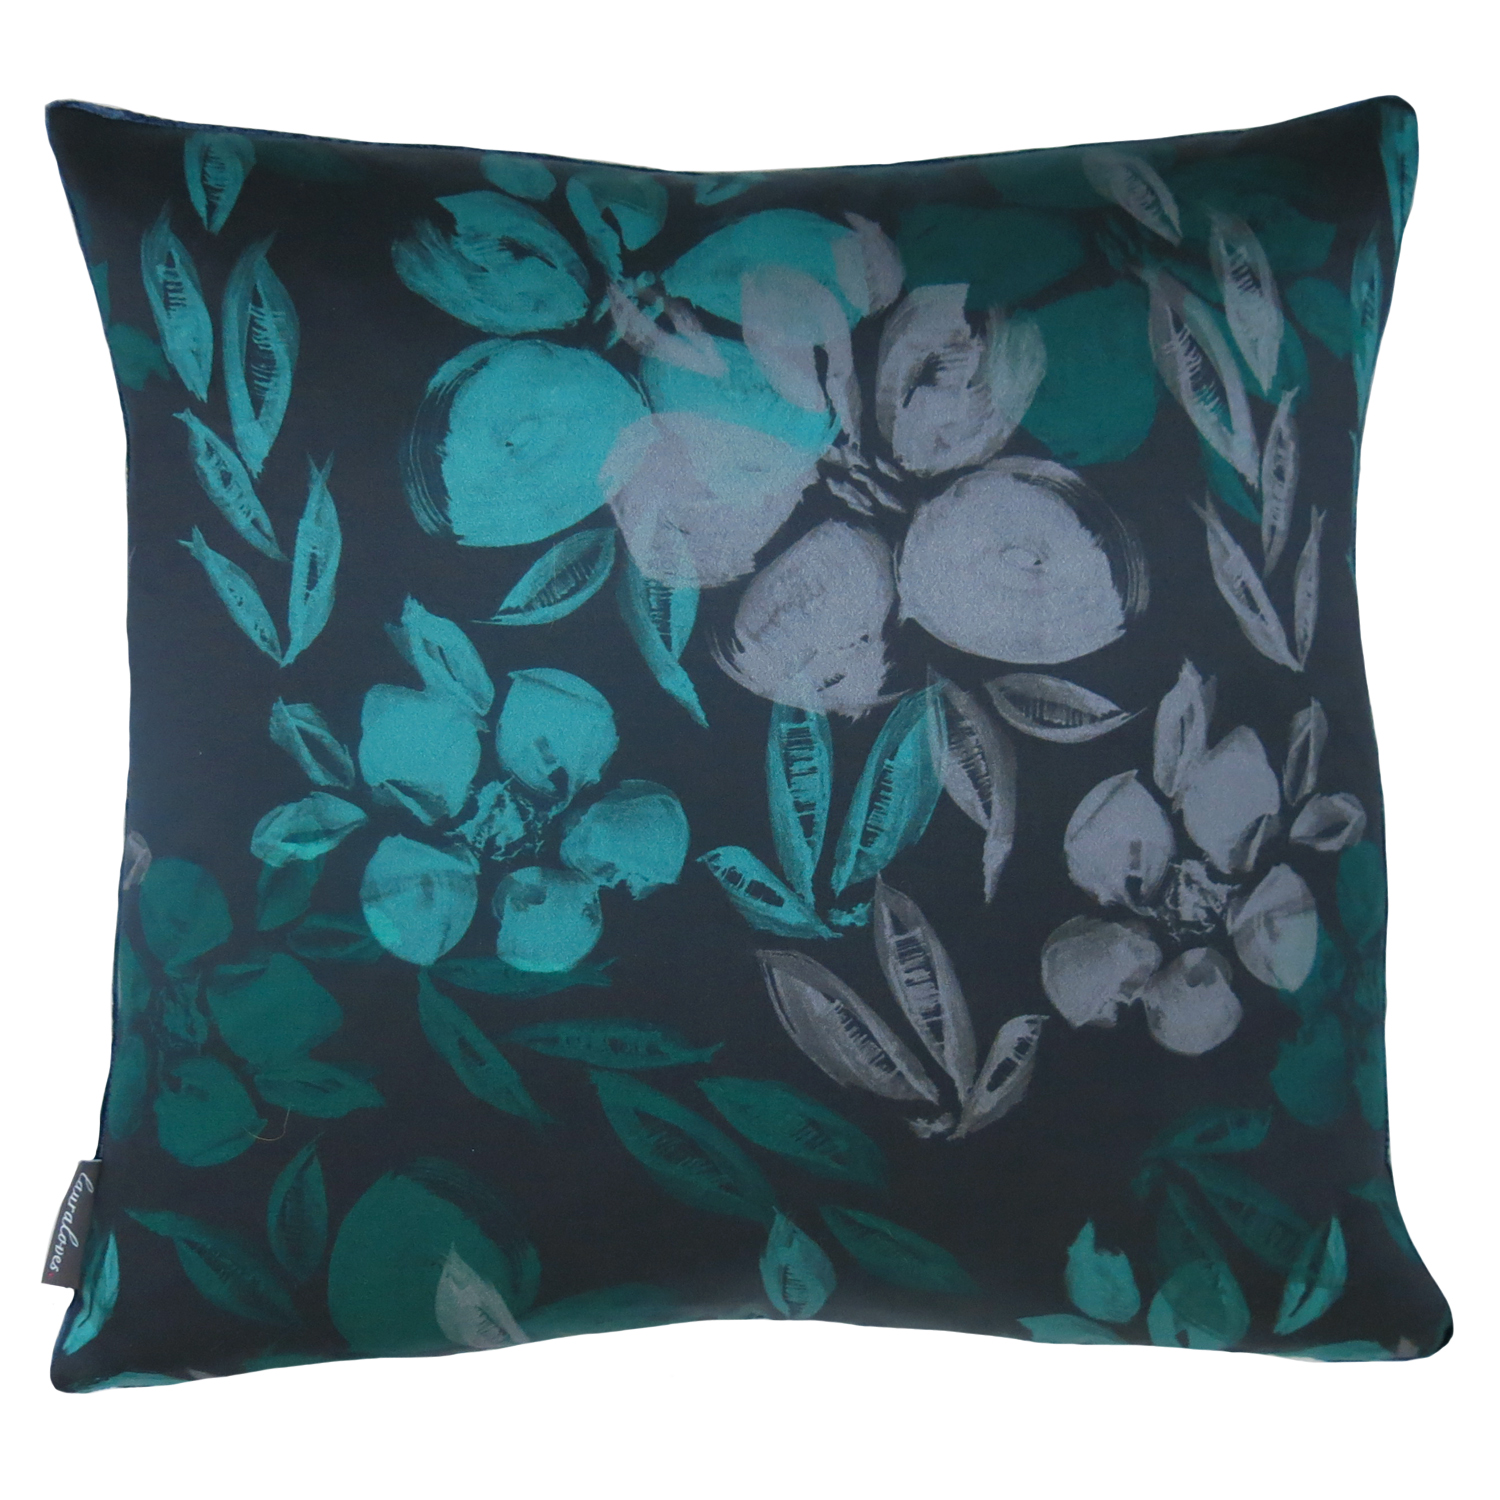 Evelyn-Floral-Silk-Cotton-Velvet-Luxury-Cushion-hand-made-blue-green-teal-size-18%22x18%22-hand-made-for-bedroom-or-sofa-designed-by-lauraloves-design.jpg